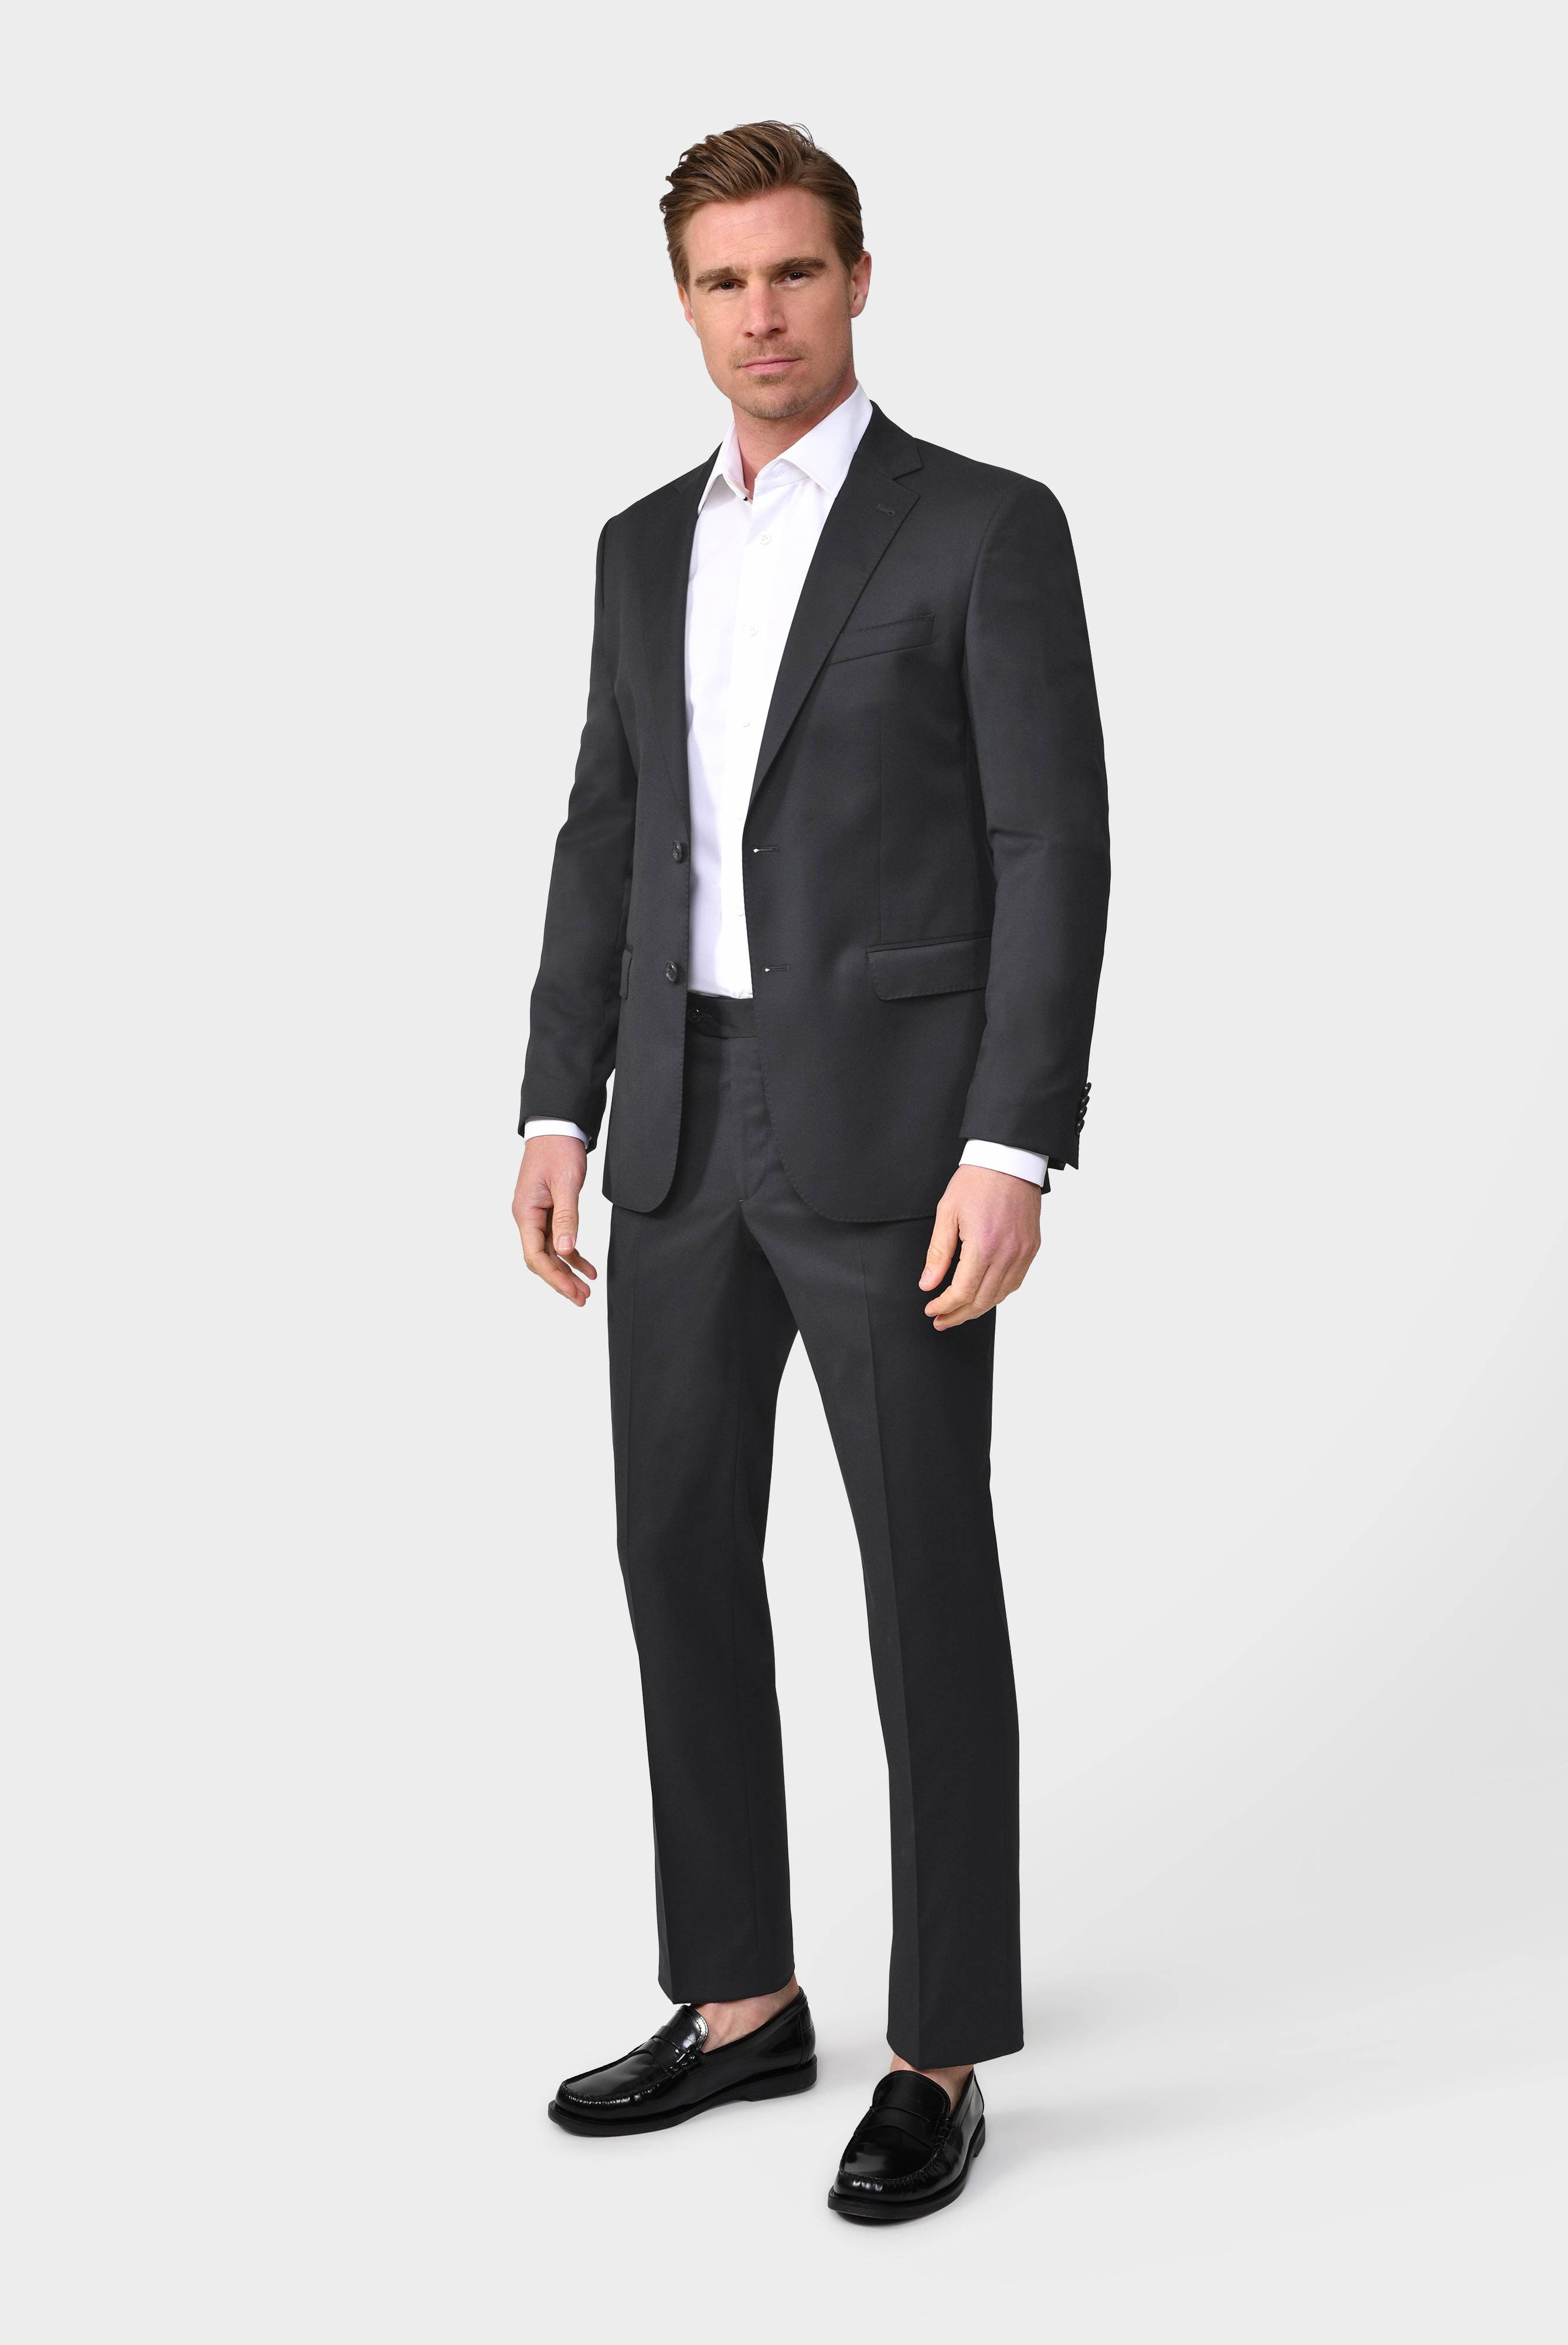 Jeans & Trousers+Men''s pants made of merino wool+80.7804.16.H01000.090.44